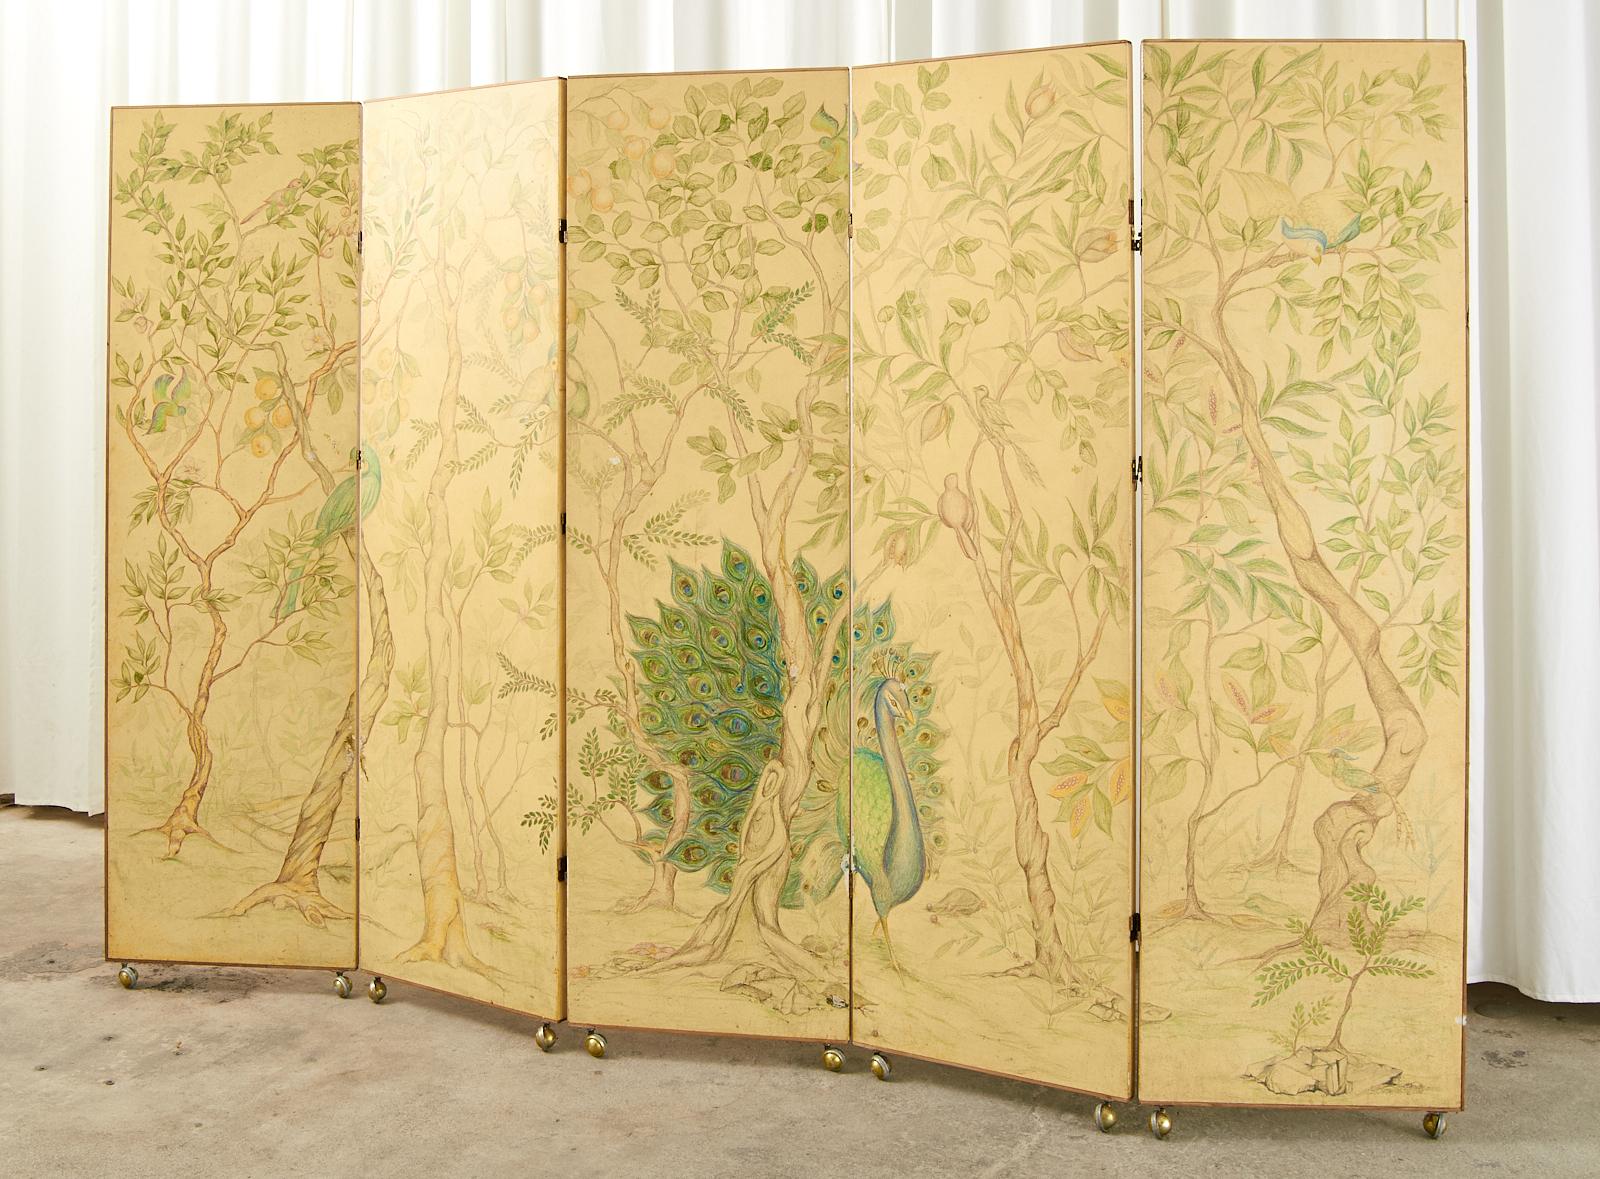 Country English Five Panel Painted Screen Equestrian Landscape 15